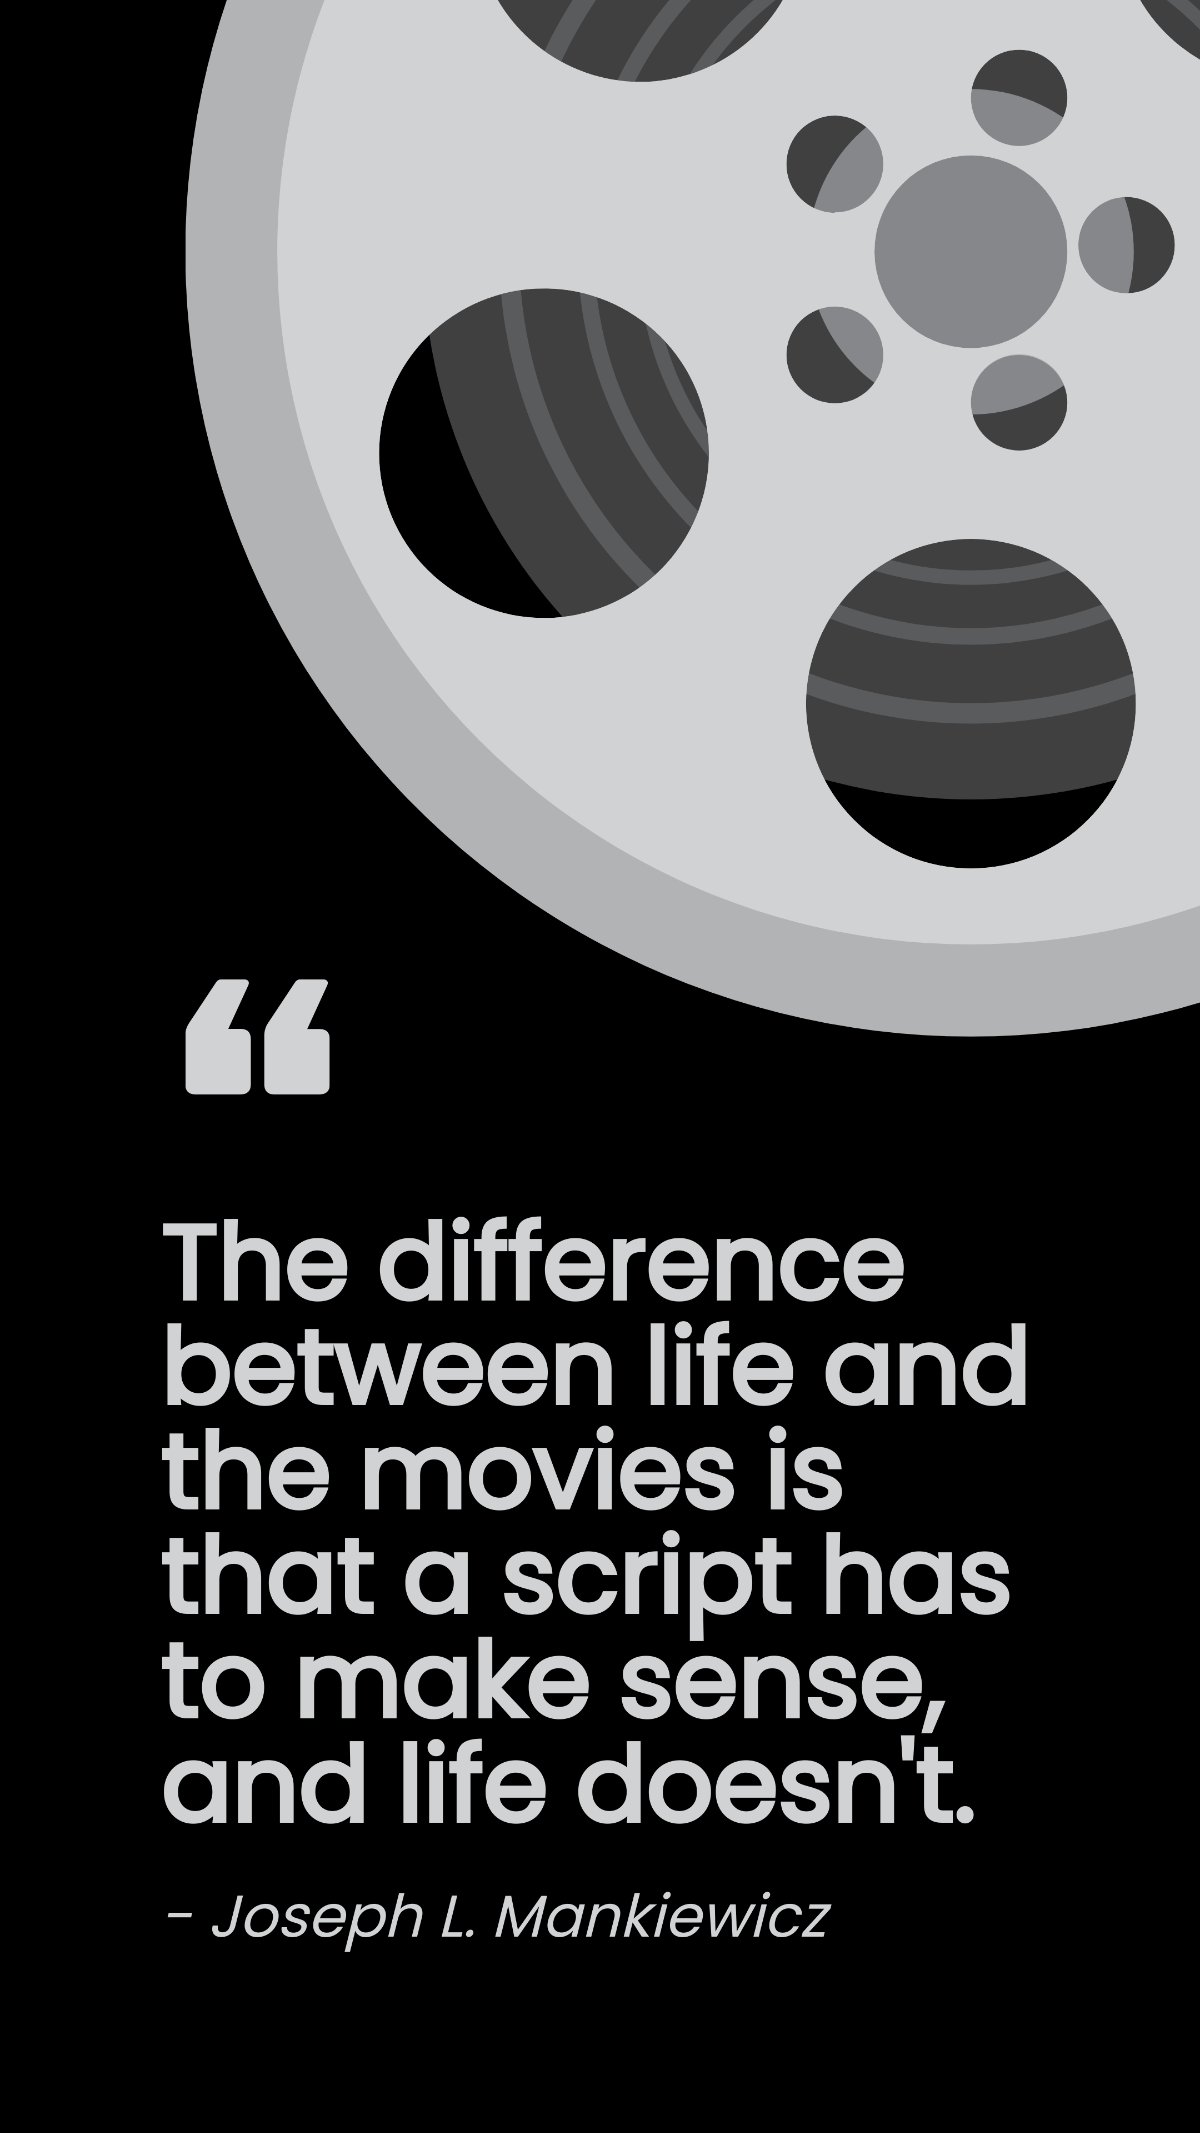 Joseph L. Mankiewicz - The difference between life and the movies is that a script has to make sense, and life doesn't. Template